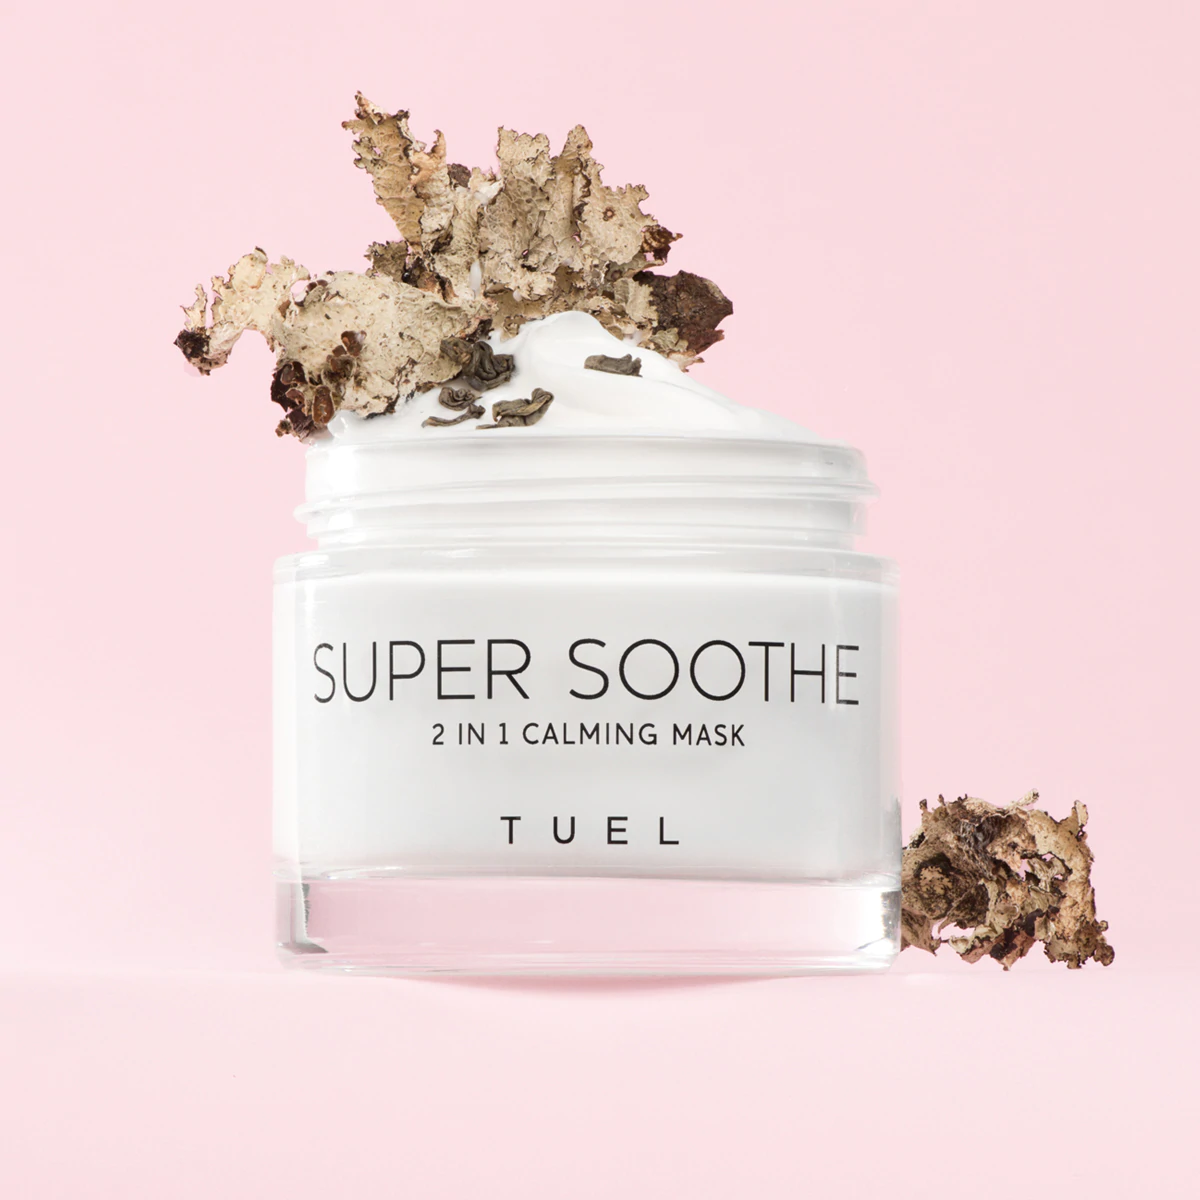 Super Soothe 2n1 Calming Mask - Retail Size